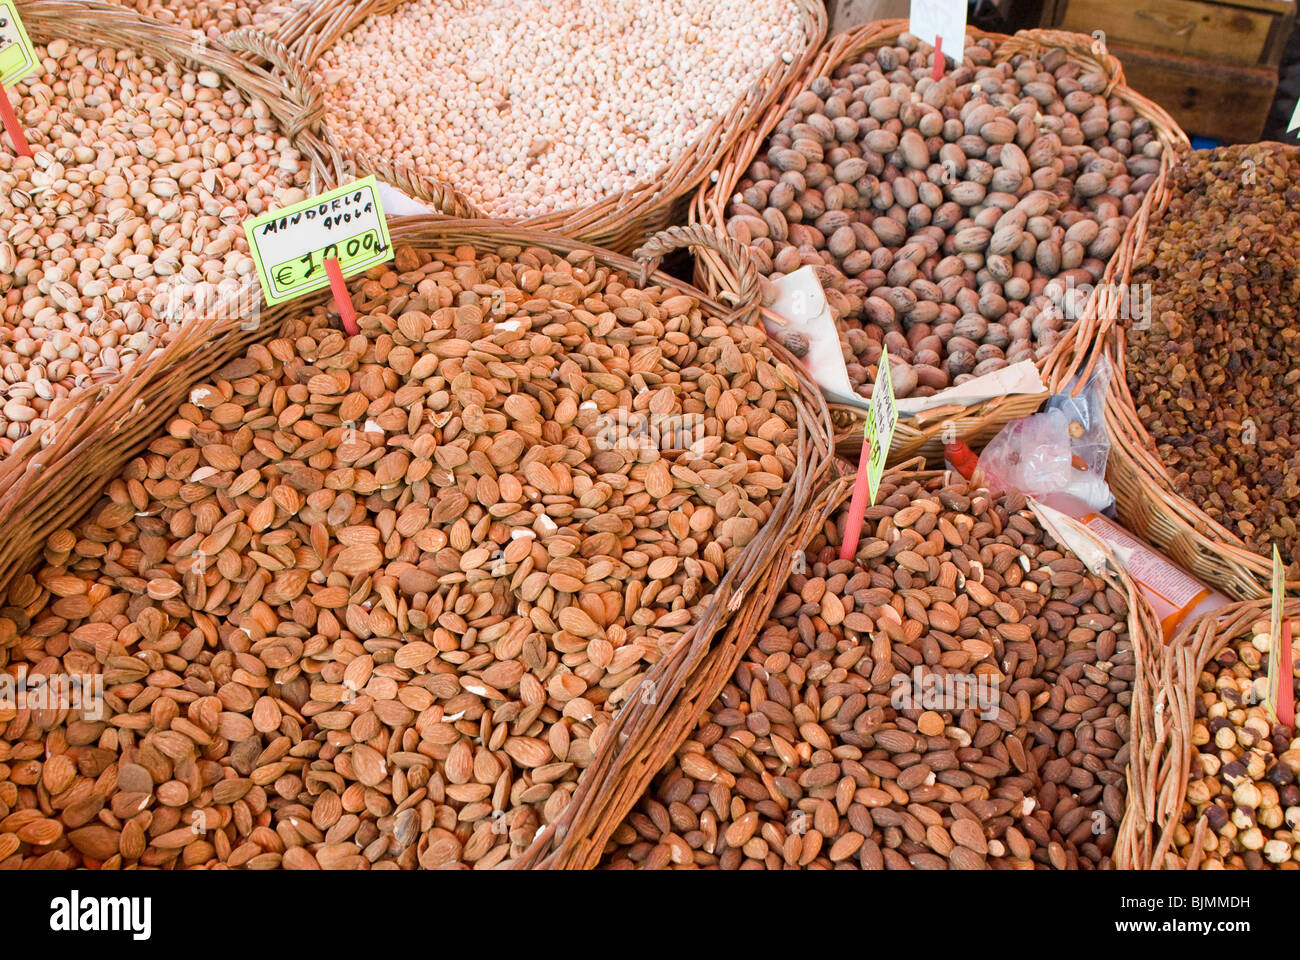 Italy, Sicily, Catania, market Fera o Luni on the Piazza Carlo Alberto,  baskets with almonds and nuts Stock Photo - Alamy